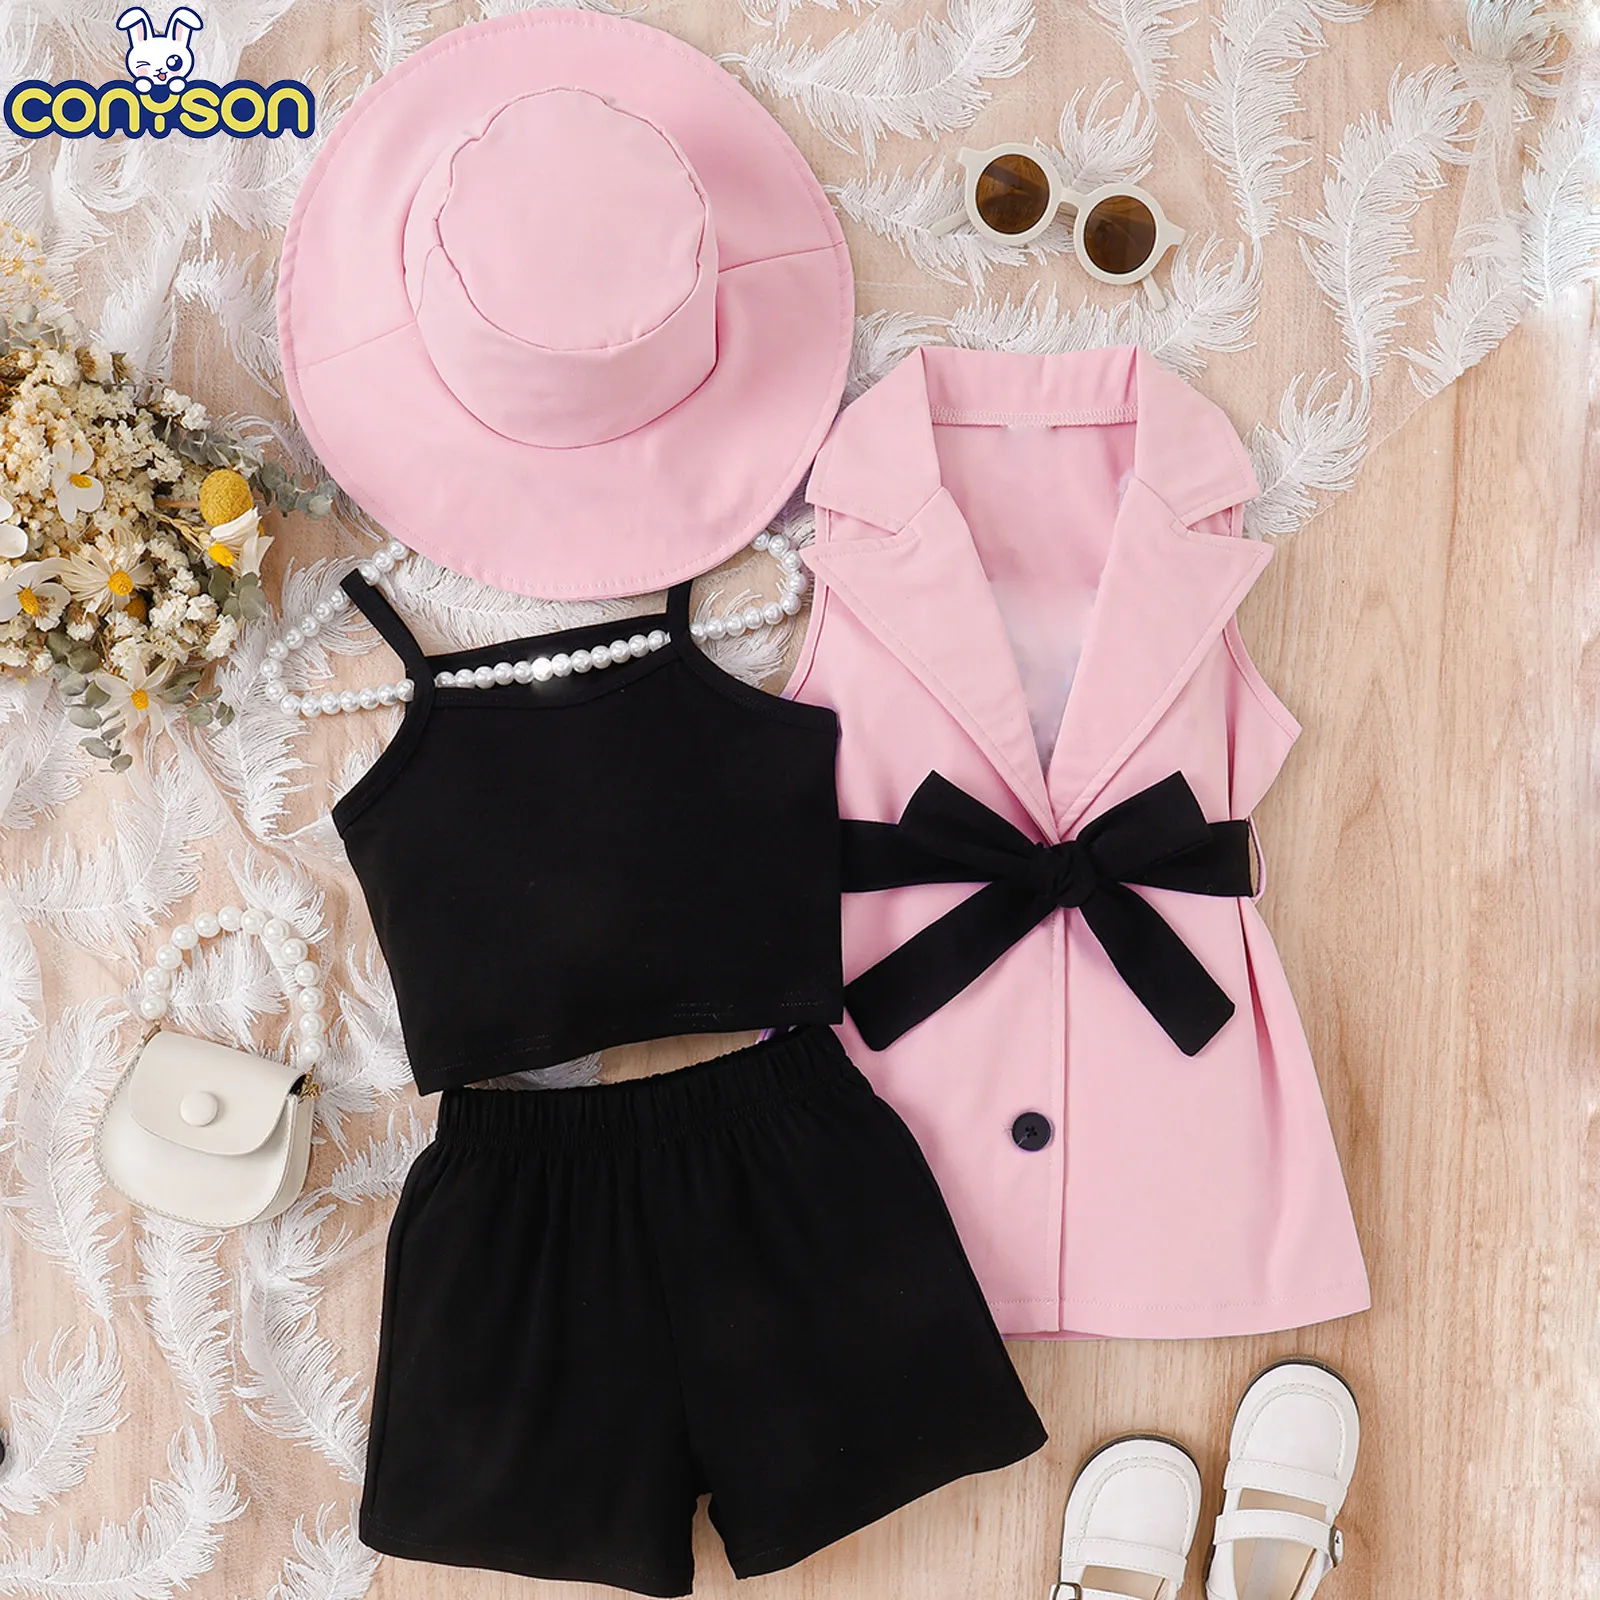 Conyson Wholesale Summer New Arrival Girl Four-Piece Suit With Strap Top +Shorts+Sleeveless Suit Jacket +Hat kids clothing Sets